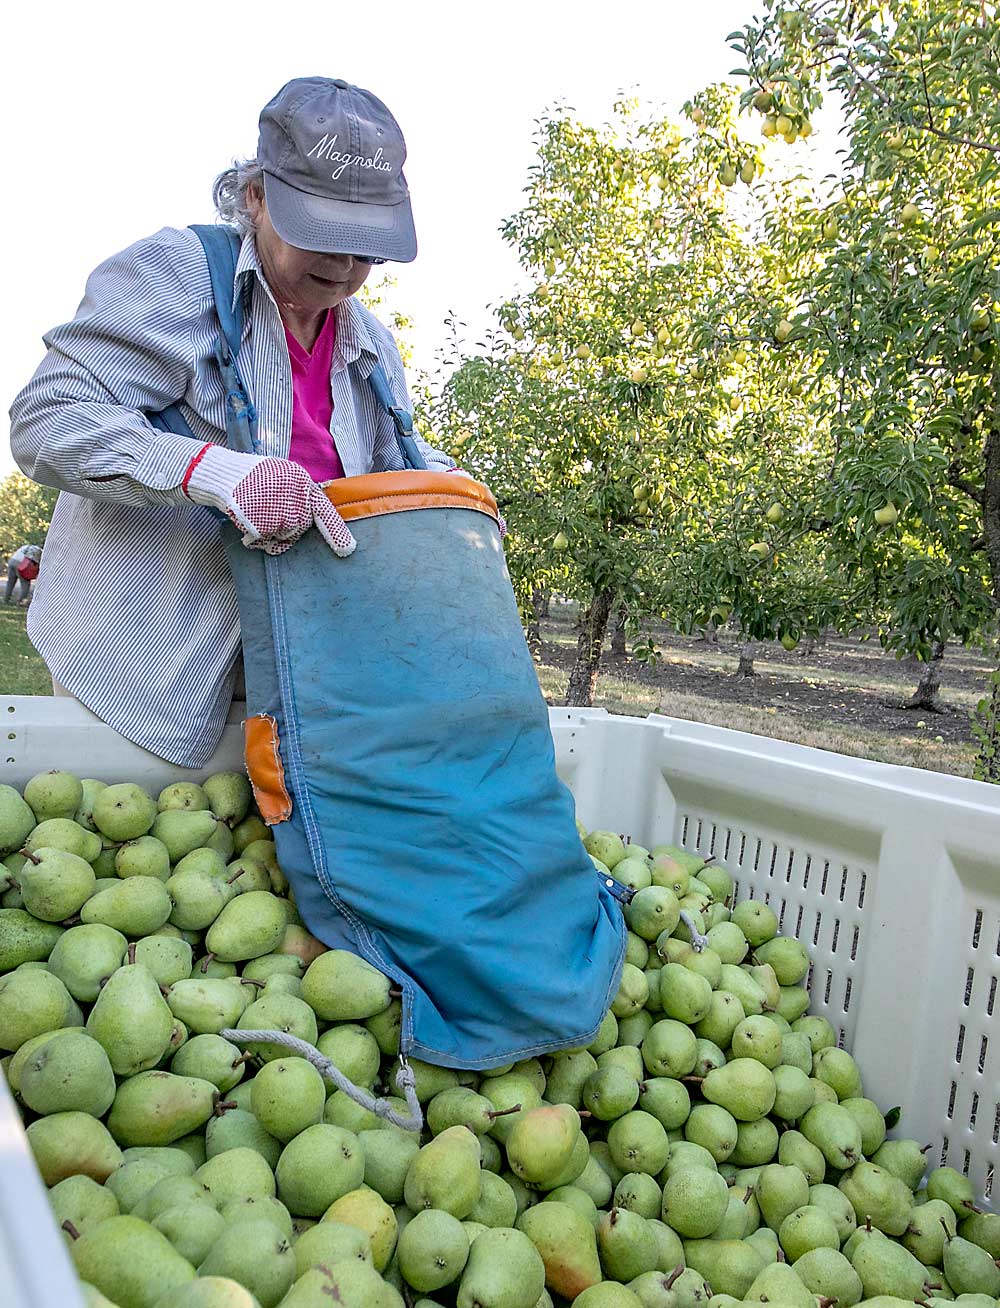 Mary Sue Stouder empties her bag of Bartletts into a bin destined for the church’s cannery in Caldwell, Idaho. The Medford farm produces about 2 million pounds of pears each year. (TJ Mullinax/Good Fruit Grower)